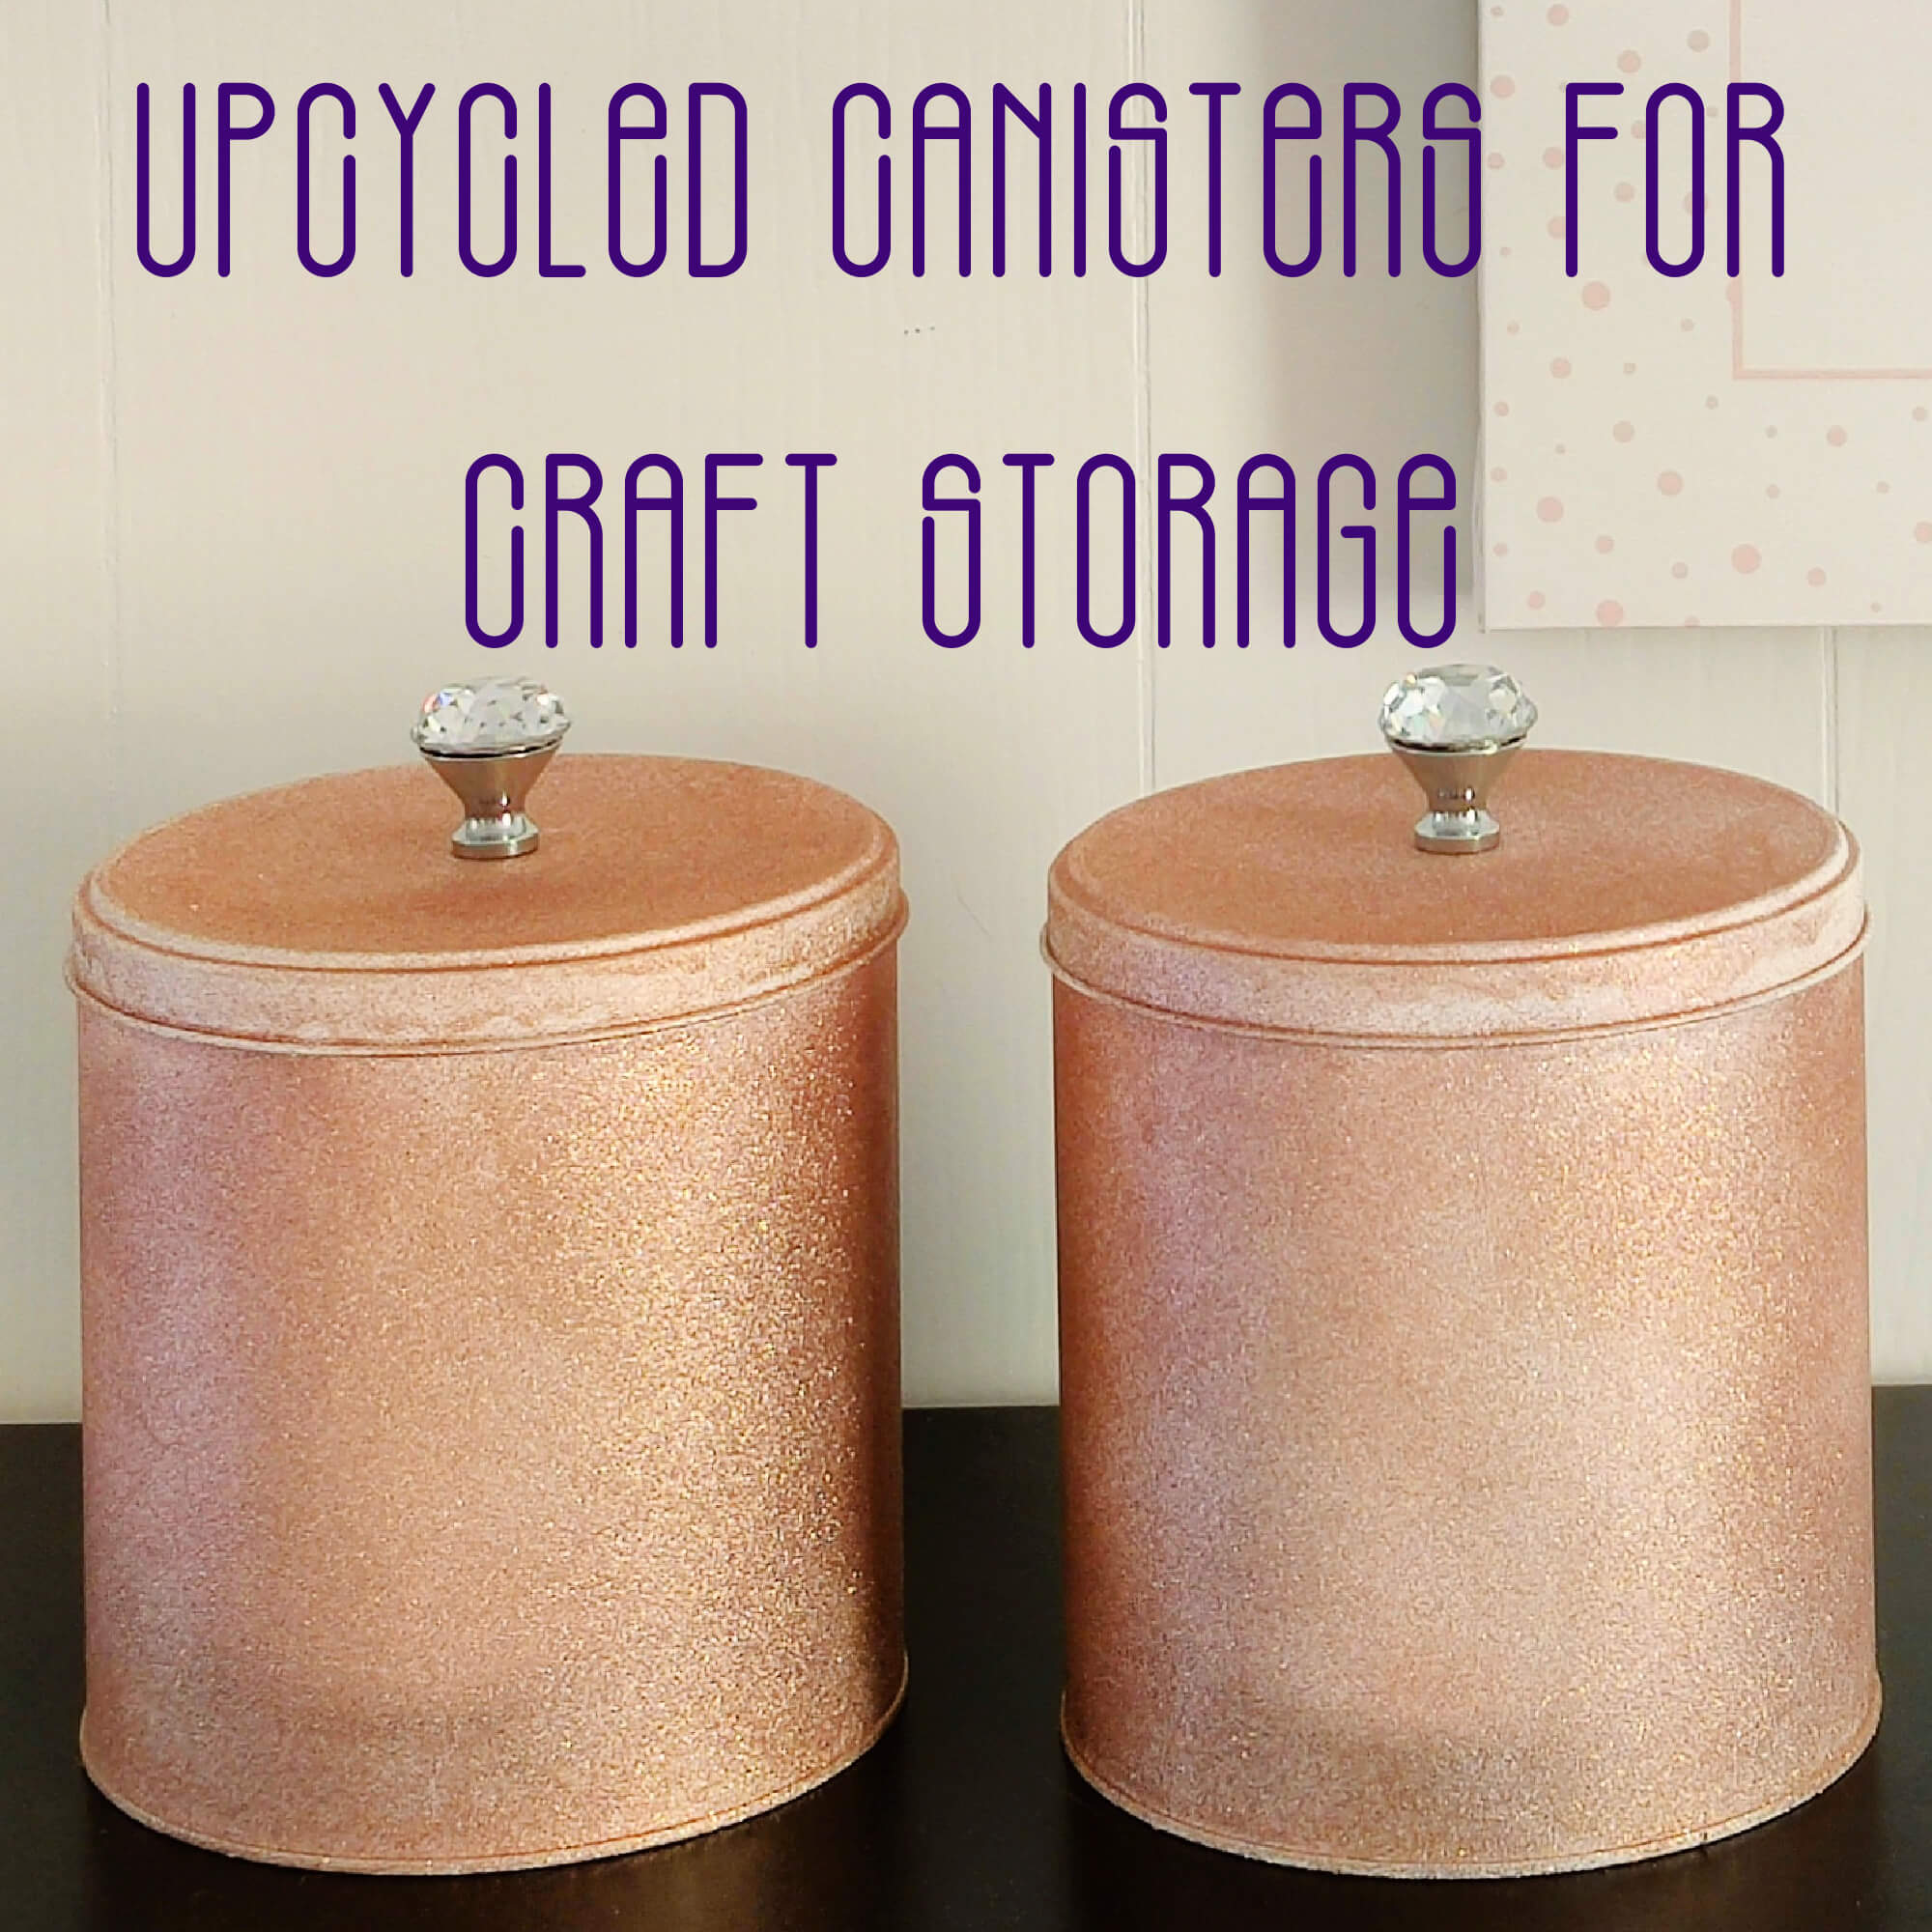 Upcycled Canisters for Craft Room Storage